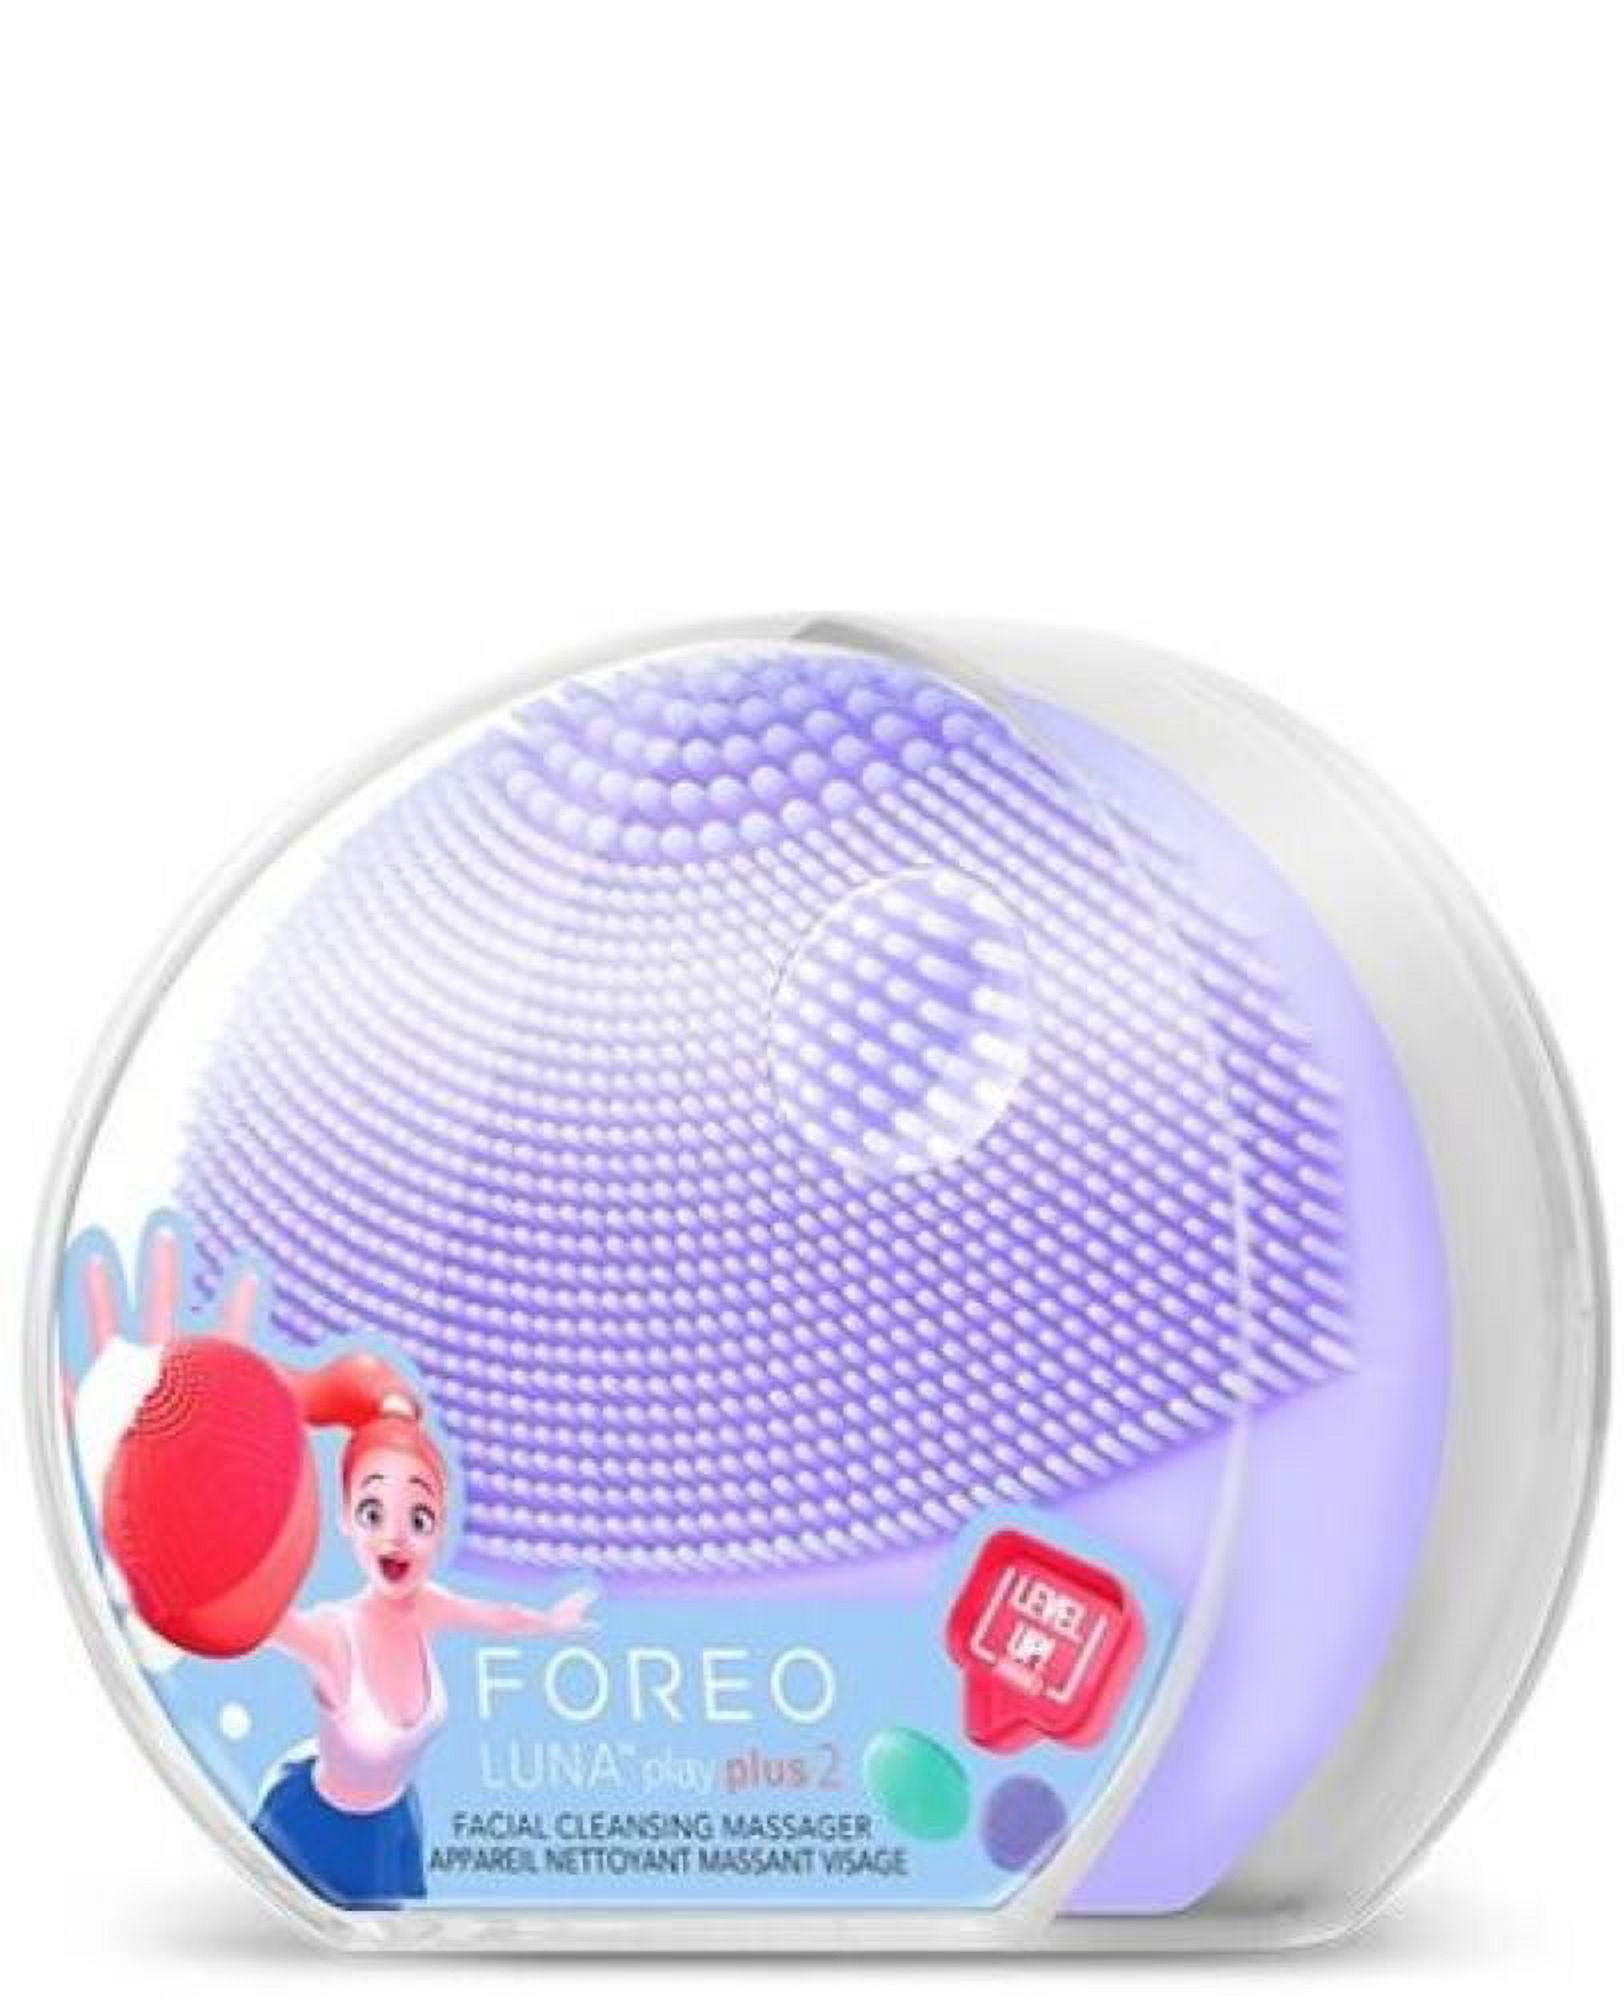 Play Luna Lilac Waterproof Facial Brush, Foreo 2 You Plus I Cleansing